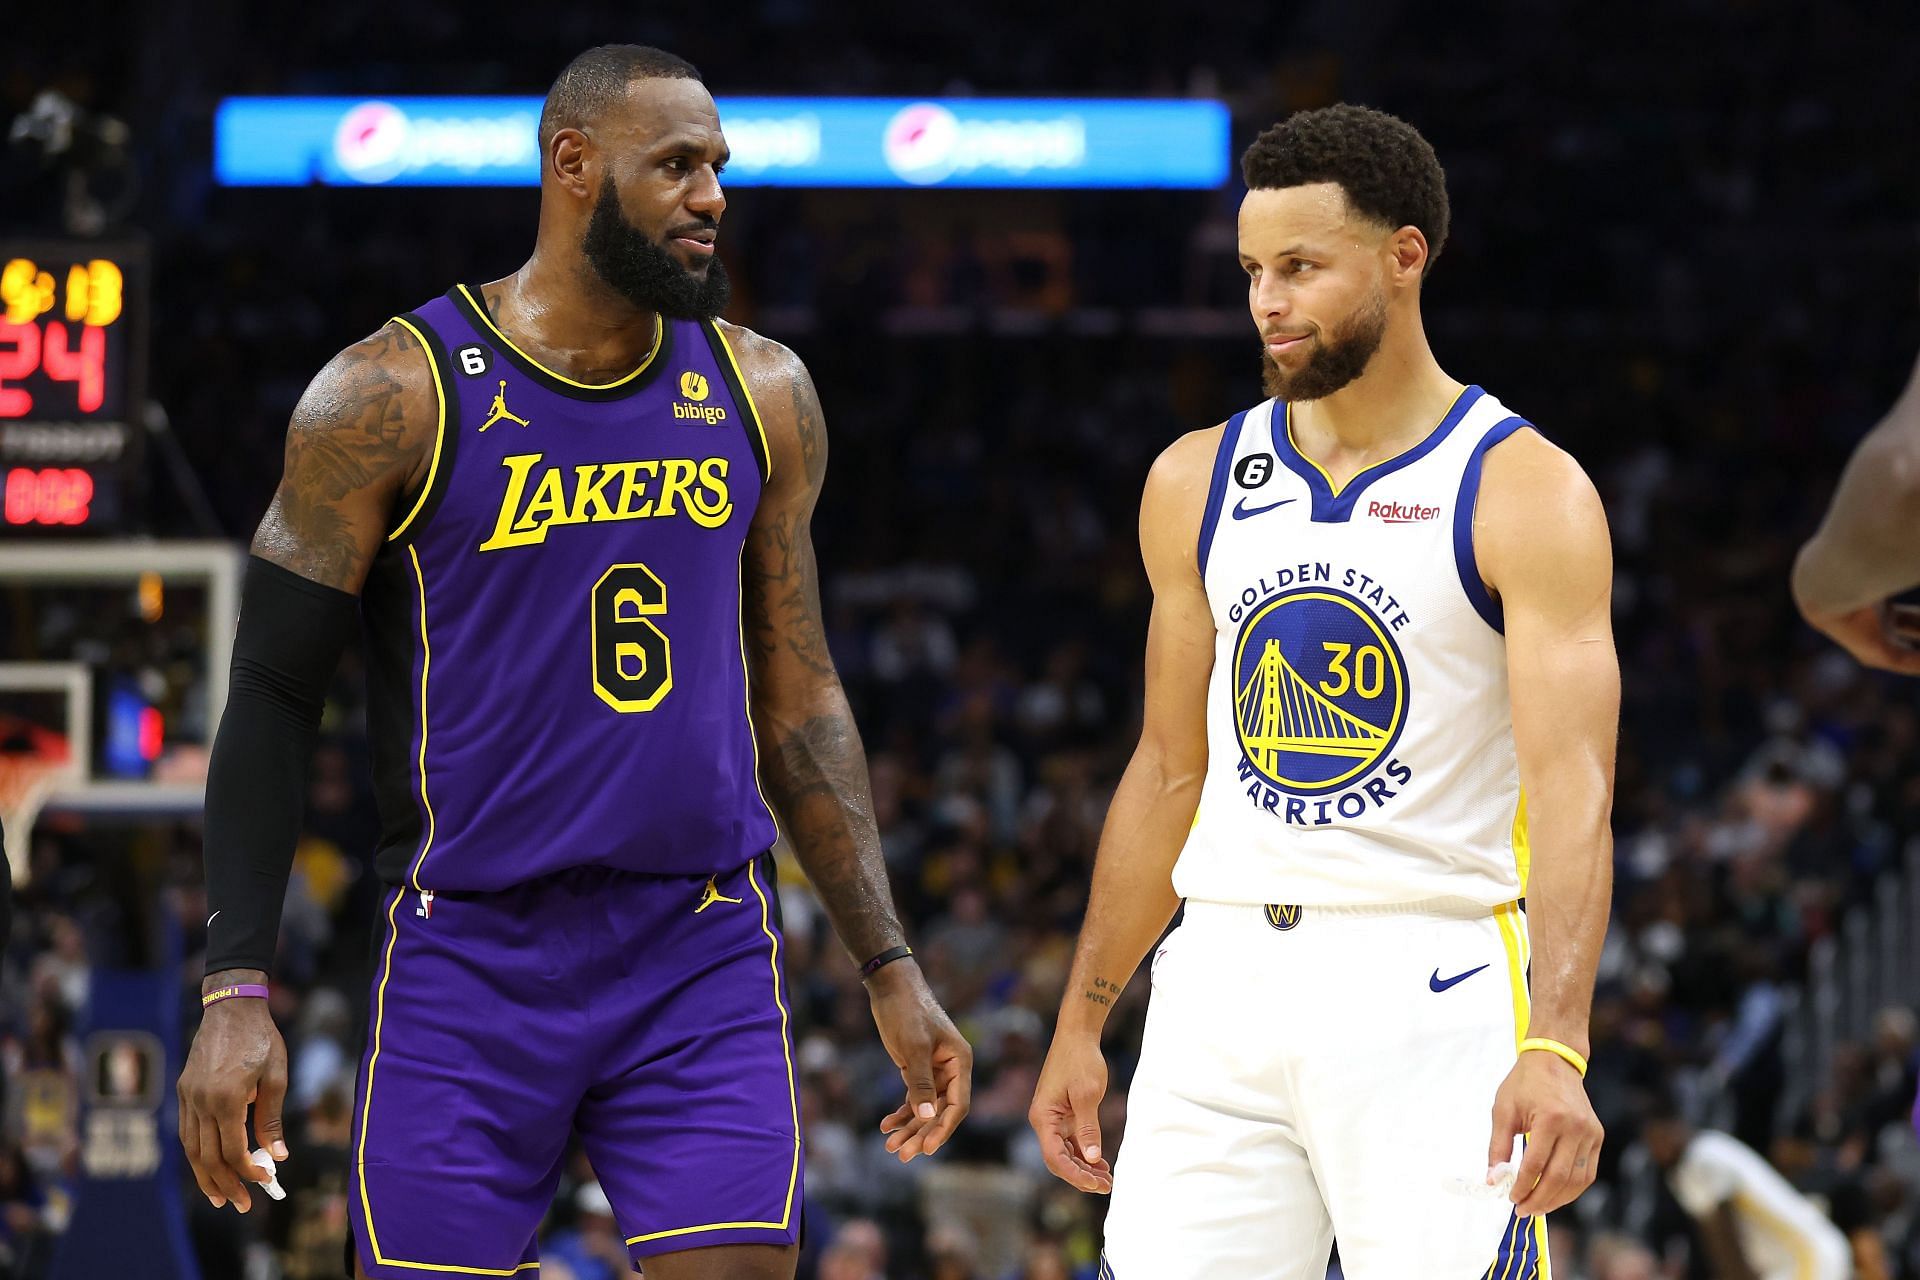 LA Lakers superstar forward LeBron James and Golden State Warriors superstar guard Stephen Curry